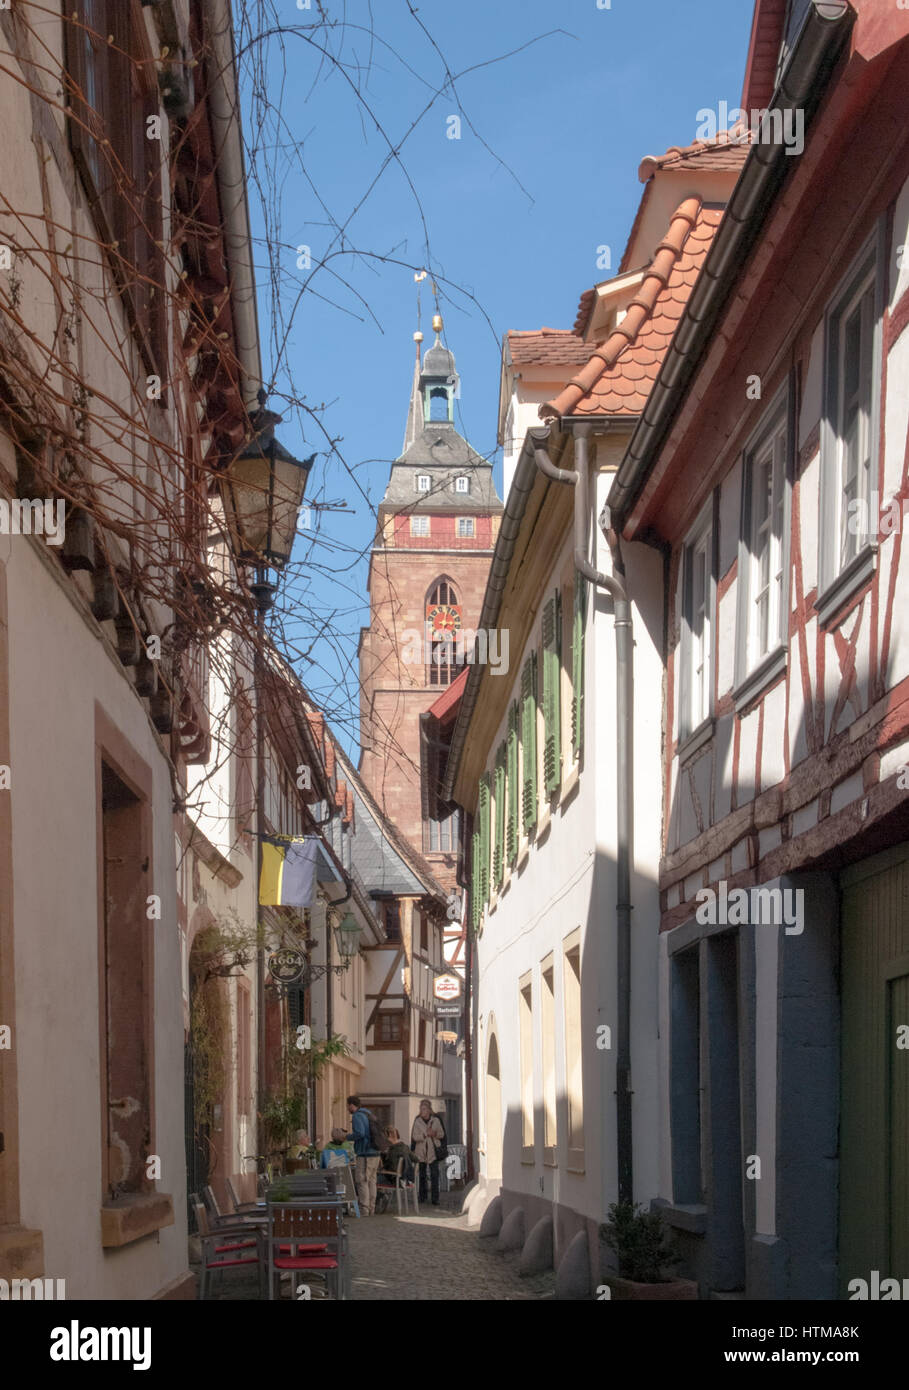 Neustadt an der Weinstrasse, Germany - April 19, 2015: Quaint old town of cozy and quiet town Stock Photo